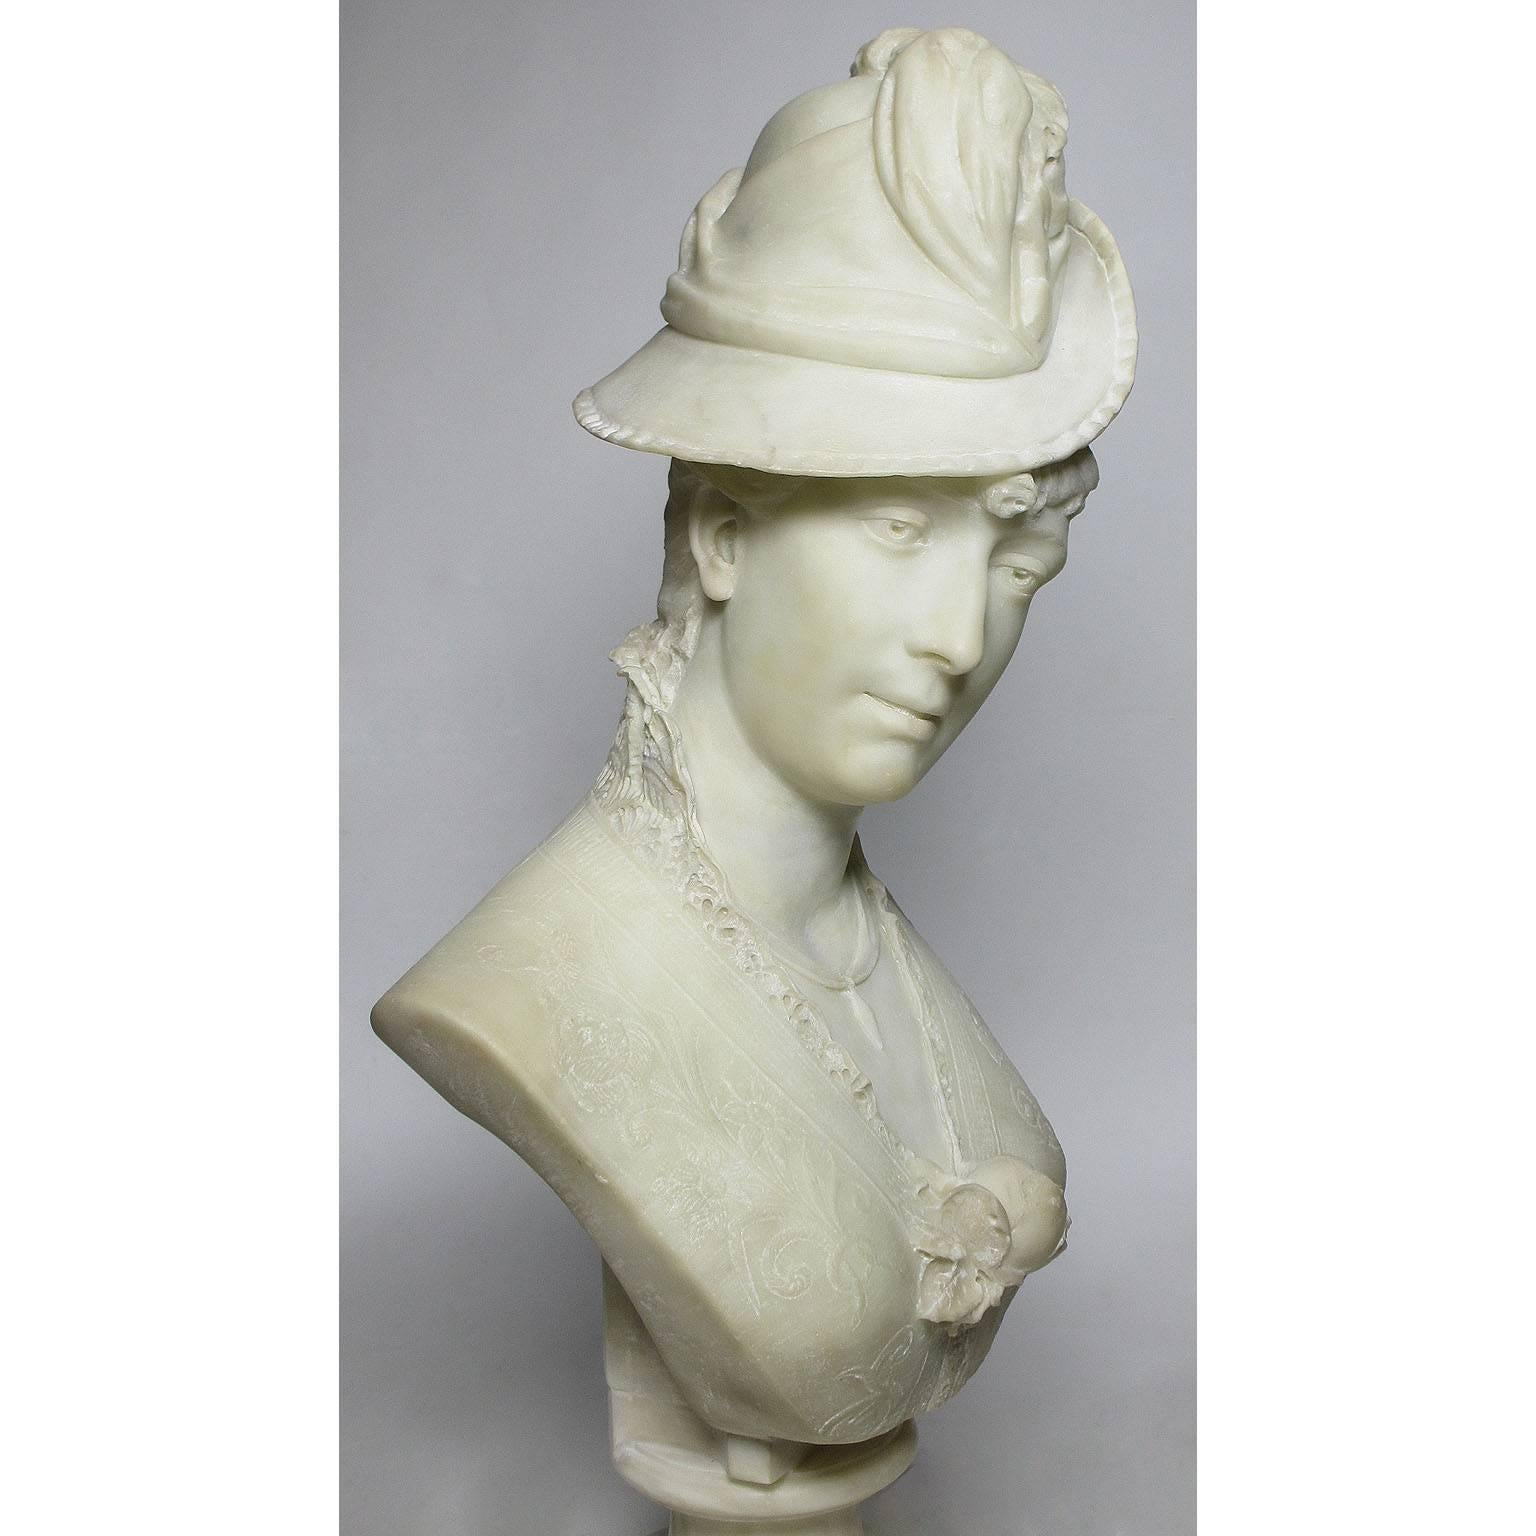 Fine Italian 19th-20th Century Lifesize Carved Marble Bust of a Posing Lady For Sale 2